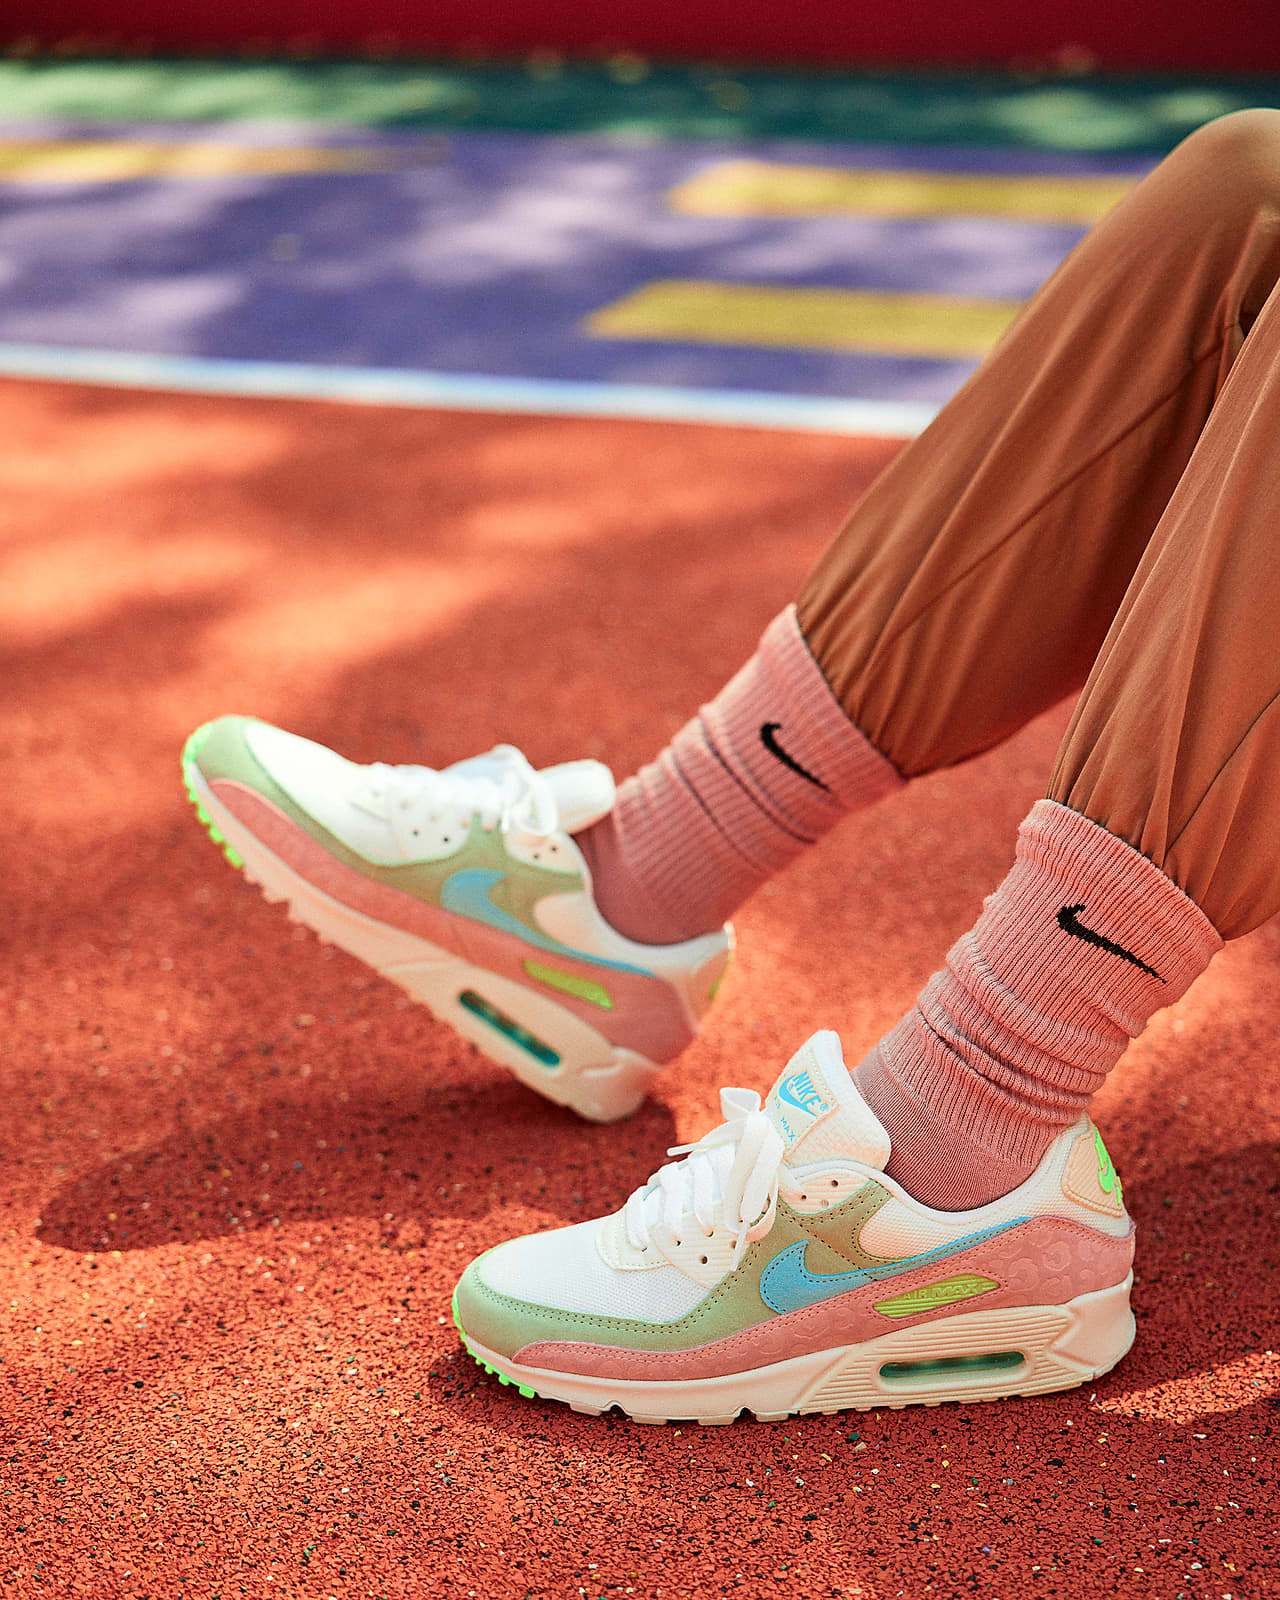 nike women's air max 90 shoes stores